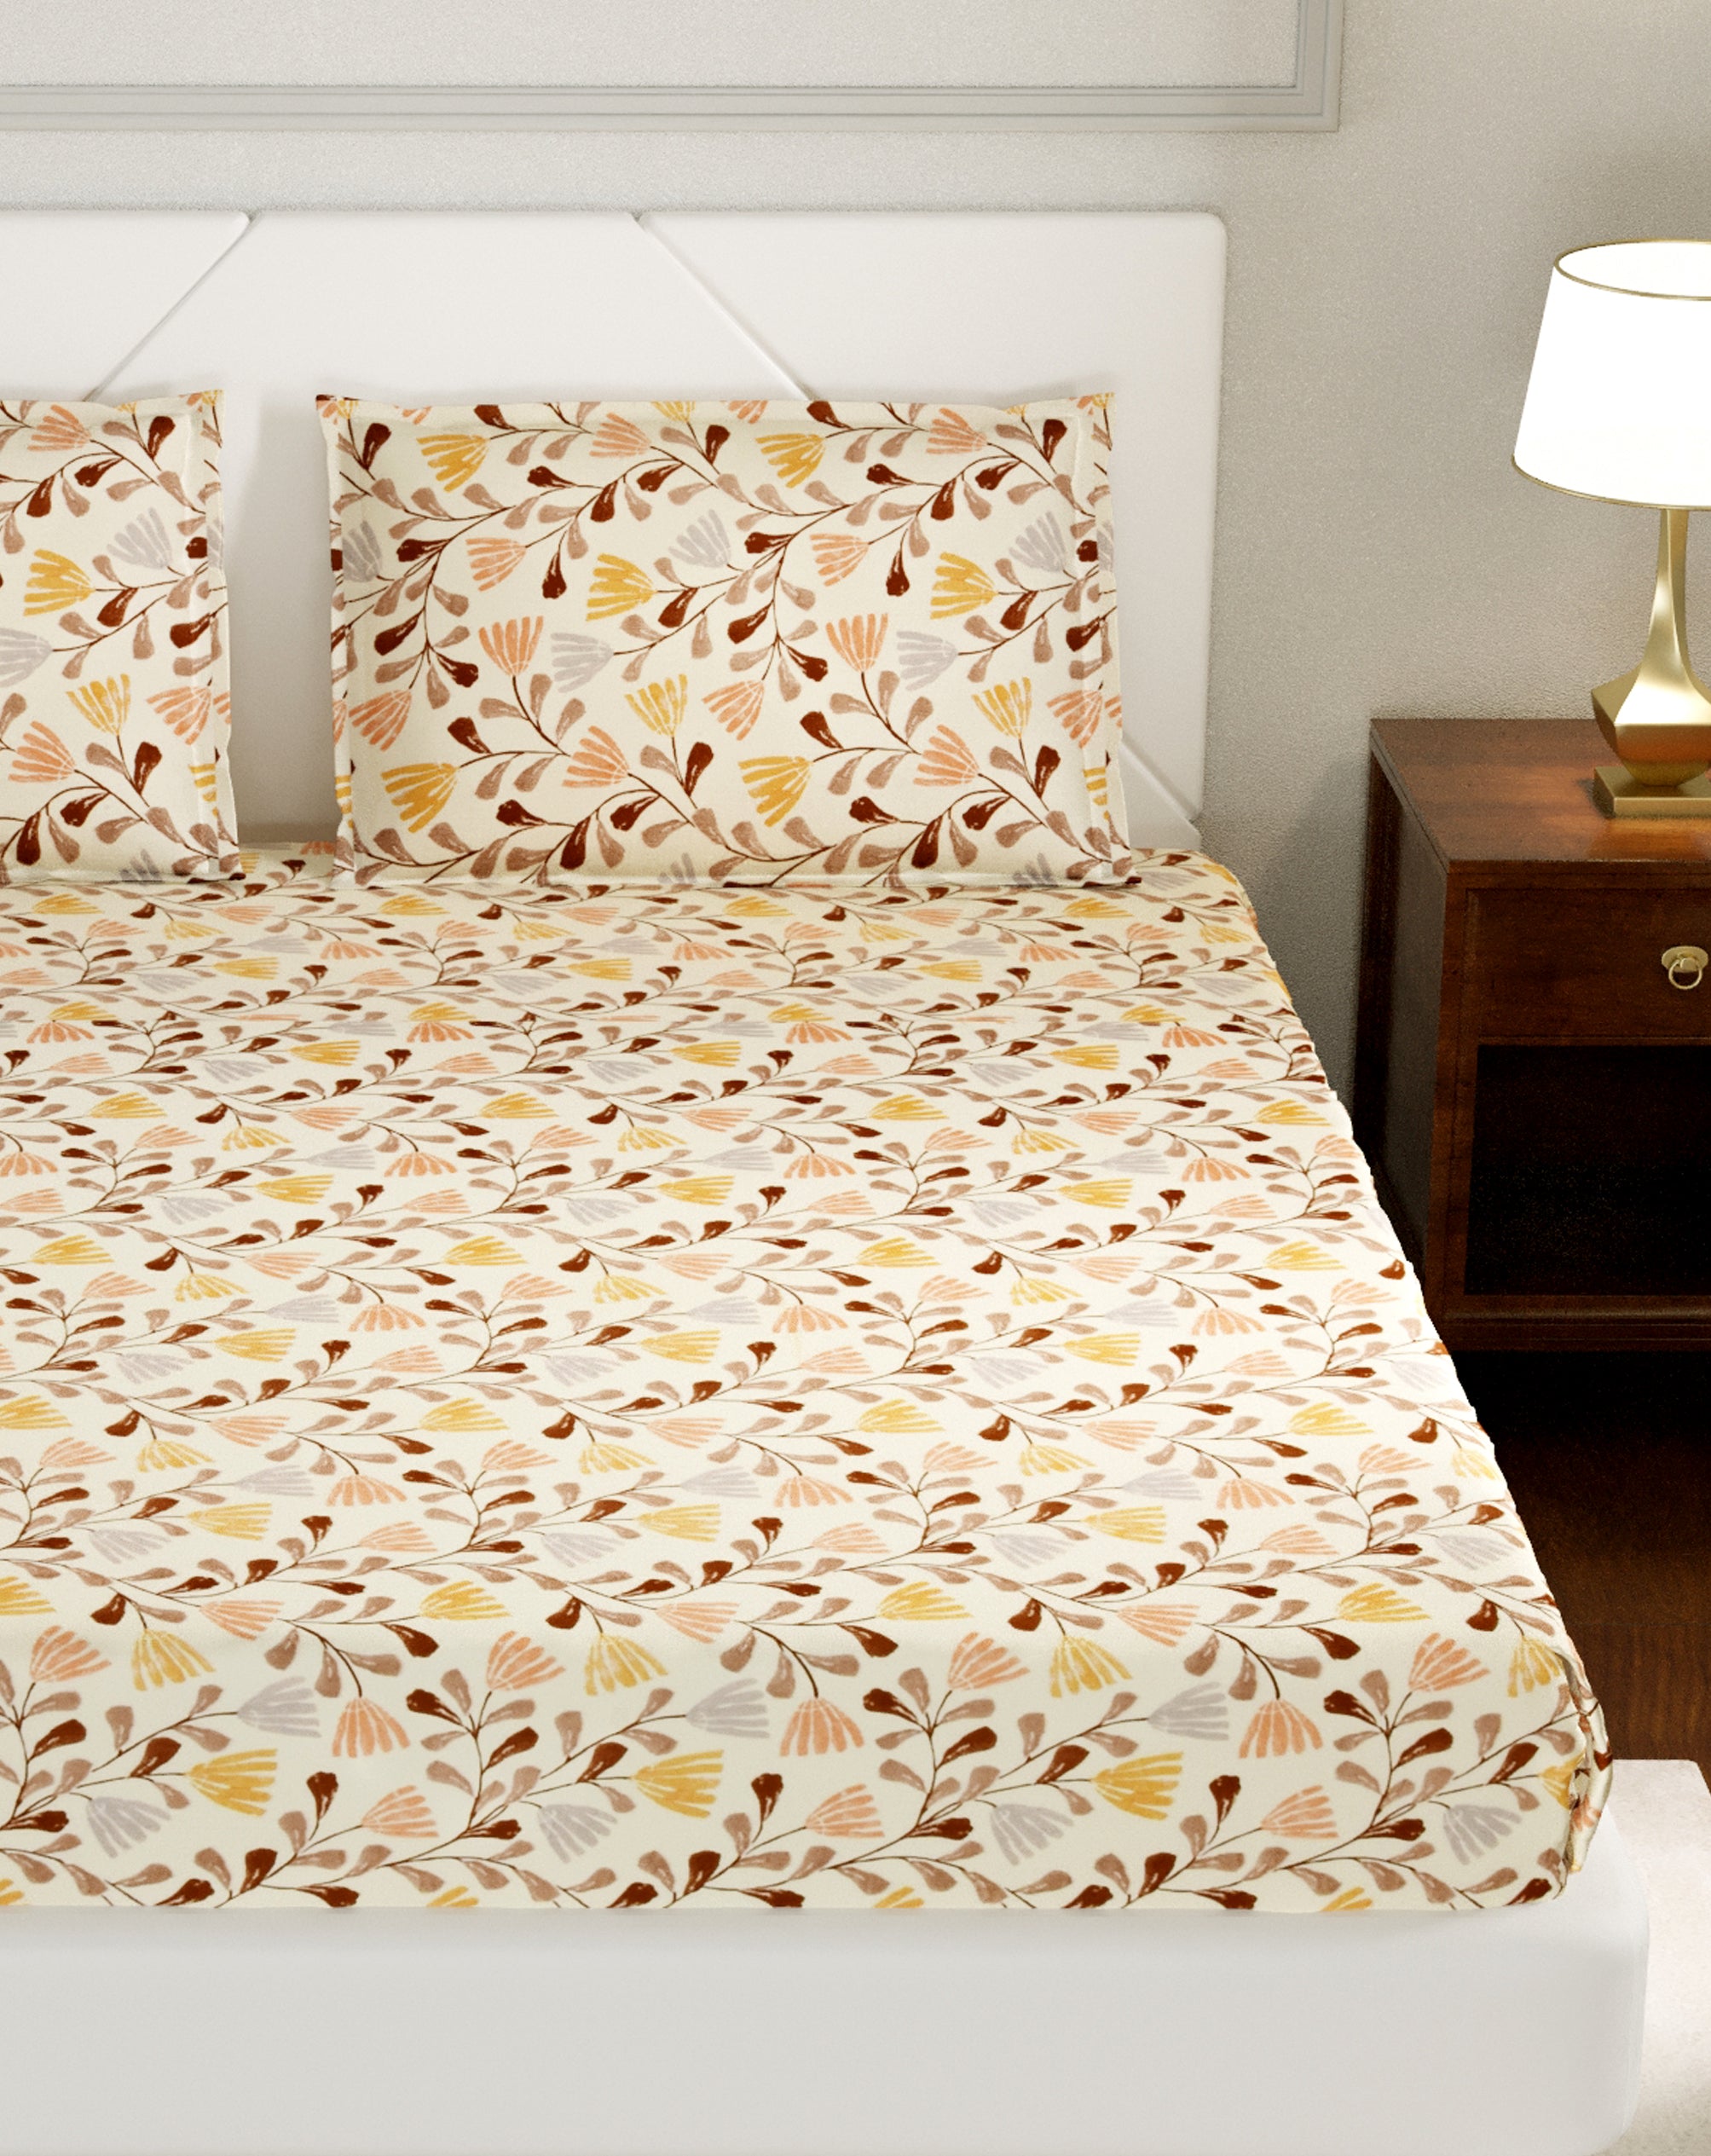 250 TC Pure Cotton Floral Print Premium Double Bed Bedsheet (100 In x 108 In) with 2 pillow cover - Beige, Brown and Orange 2